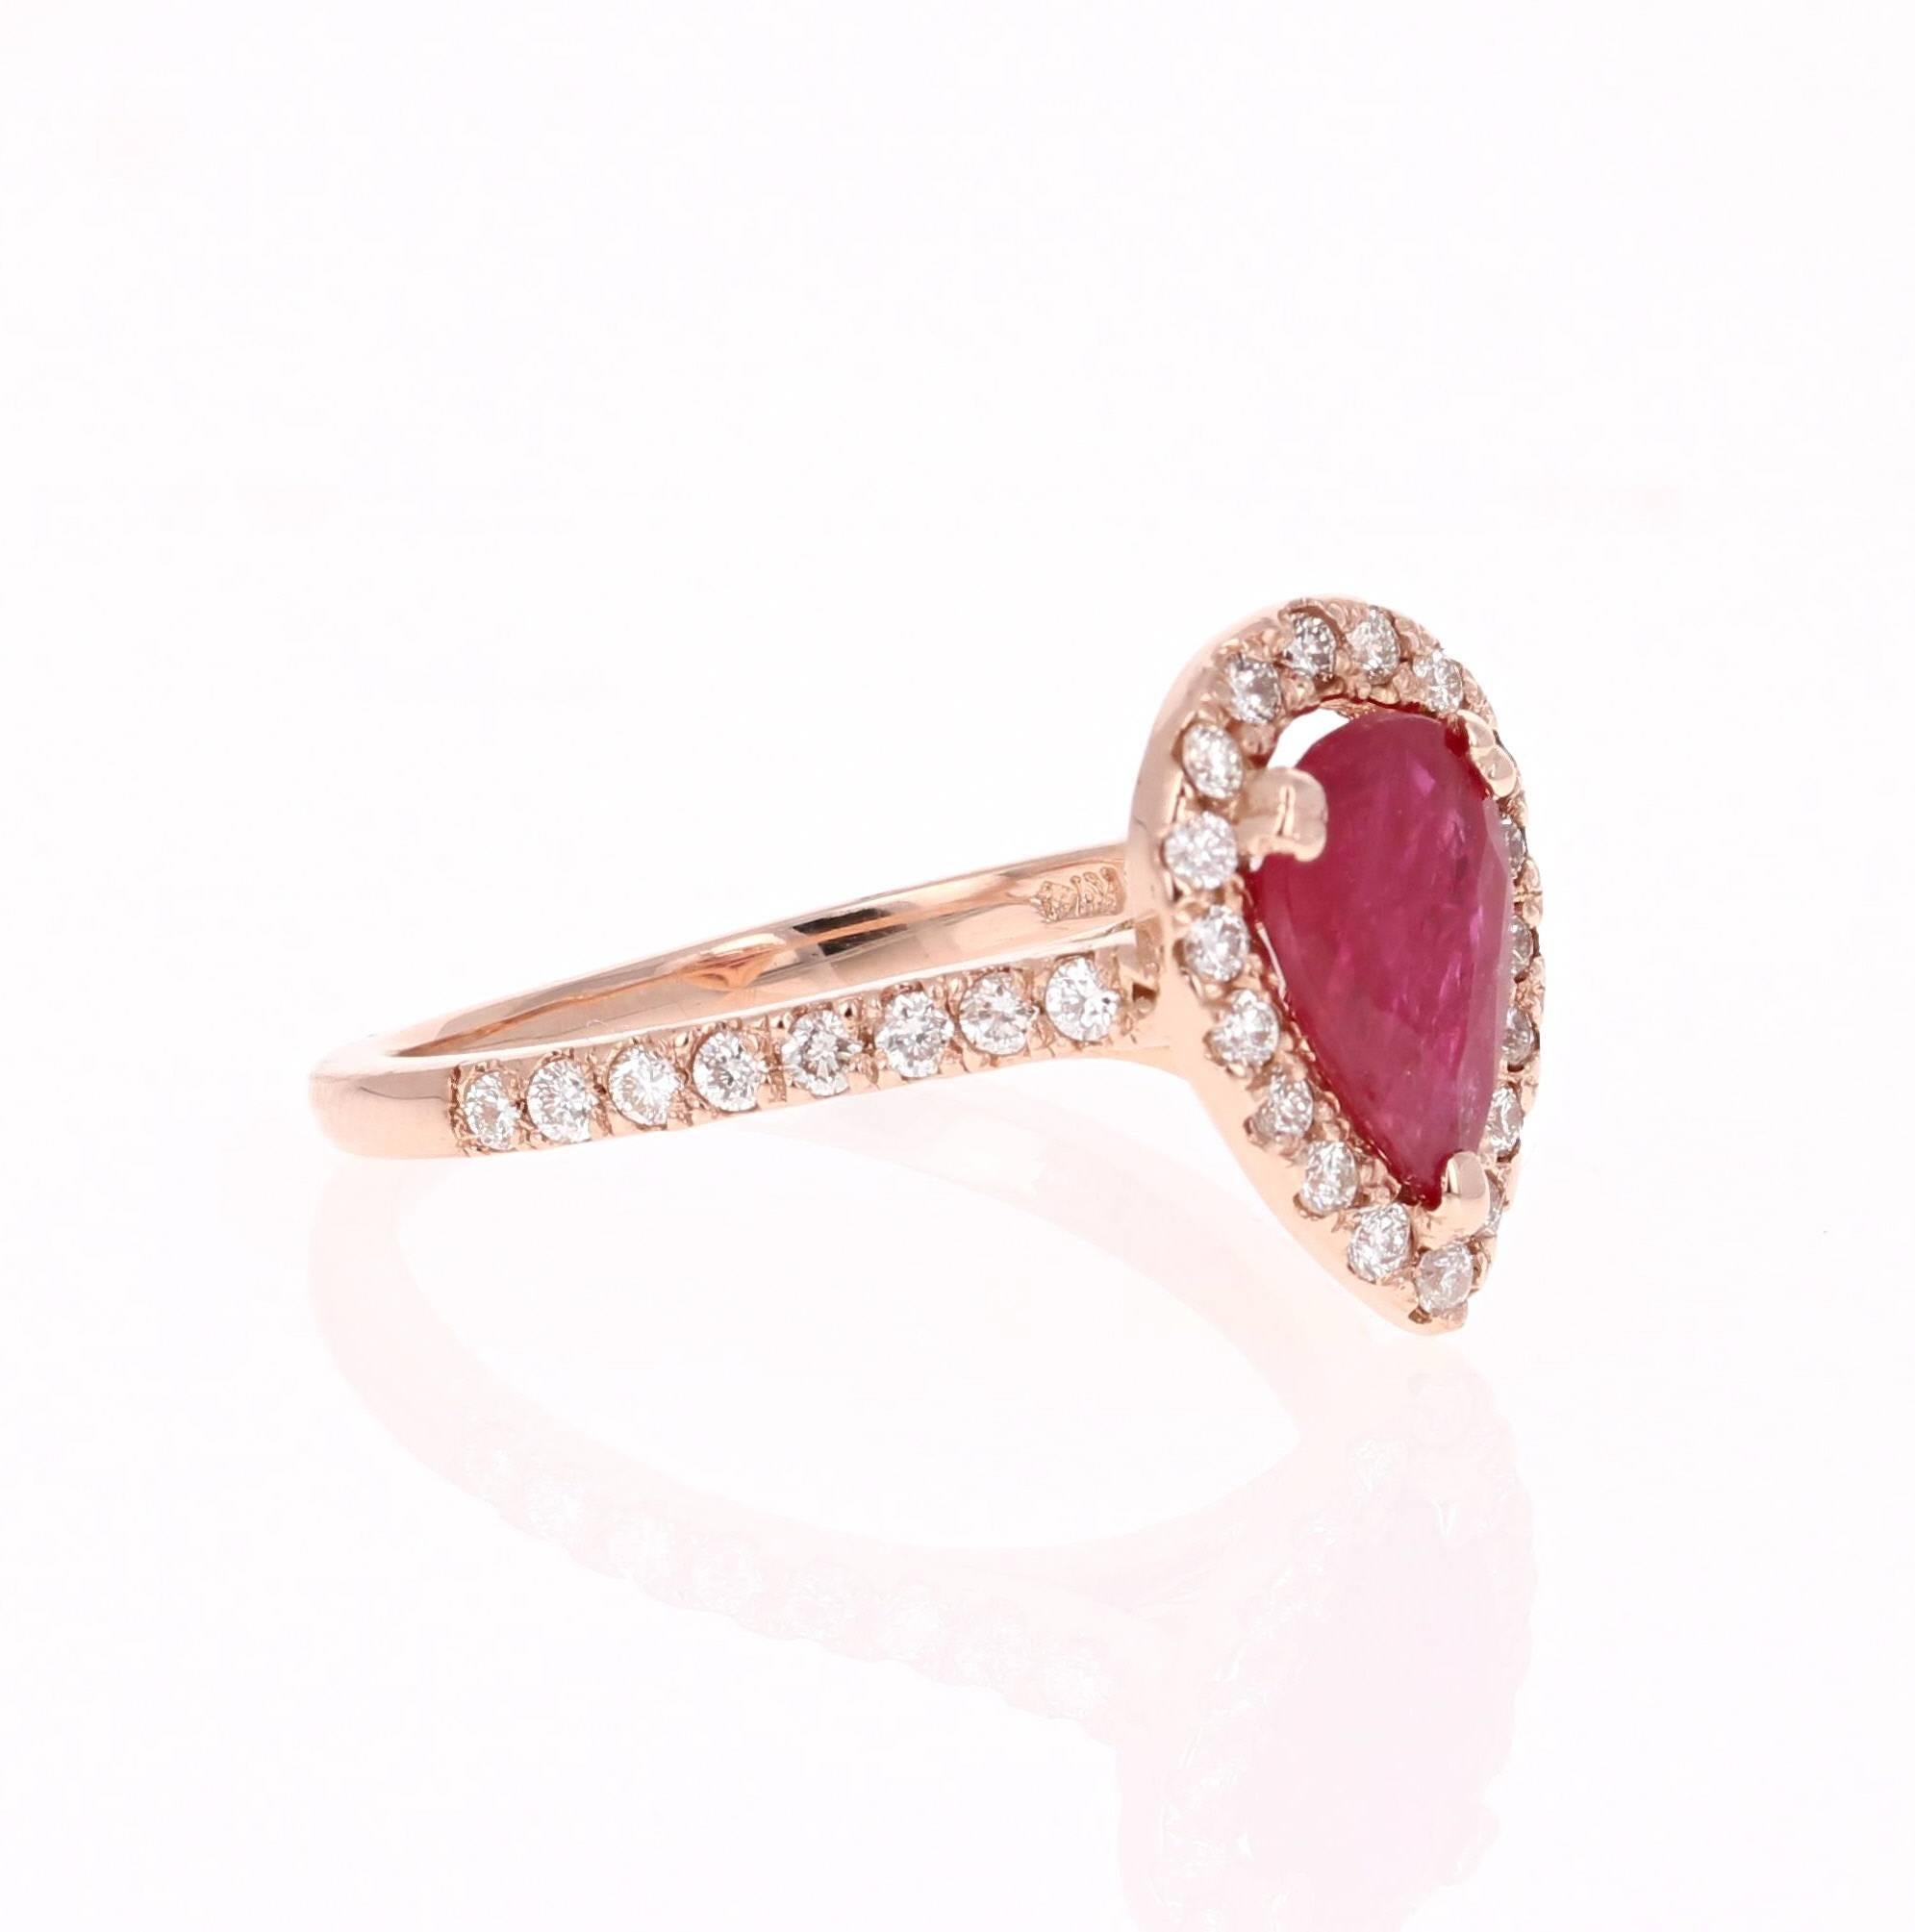 This ring is truly a beauty and can easily be transformed into a unique engagement or bridal ring!
There is a Pear Cut Ruby set in the center of the ring that weighs 1.51 carats.  There are also 36 Round Cut Diamonds that weigh 0.70 carats (Clarity: